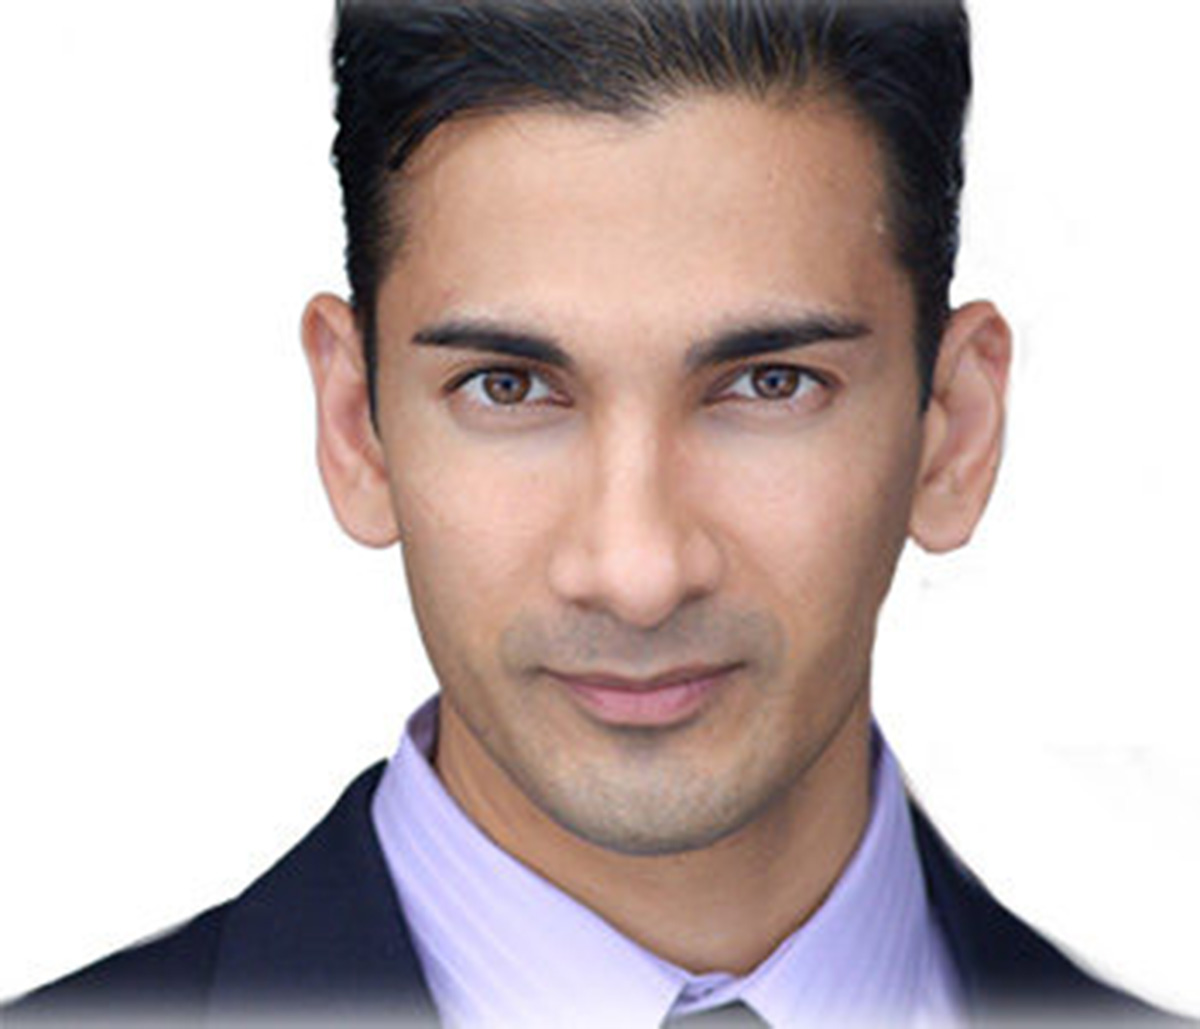 Dr. Dennis Dass is a board certified plastic surgeon in Beverly Hills